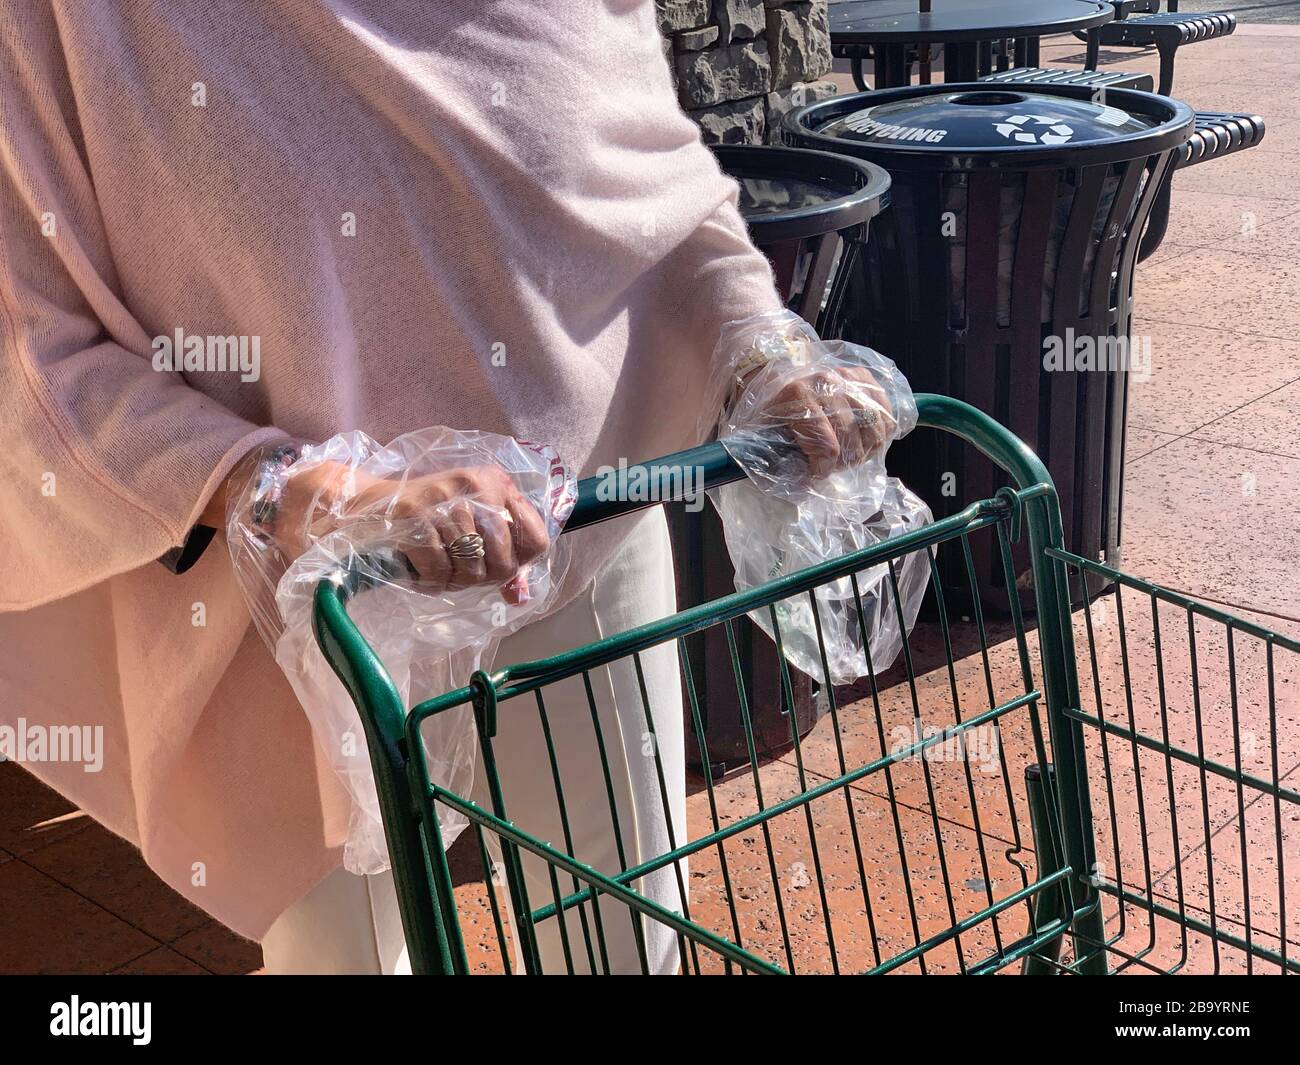 Young woman uses plastic bags as gloves to prevent contact with Coronavirus while grocery shopping. Stock Photo